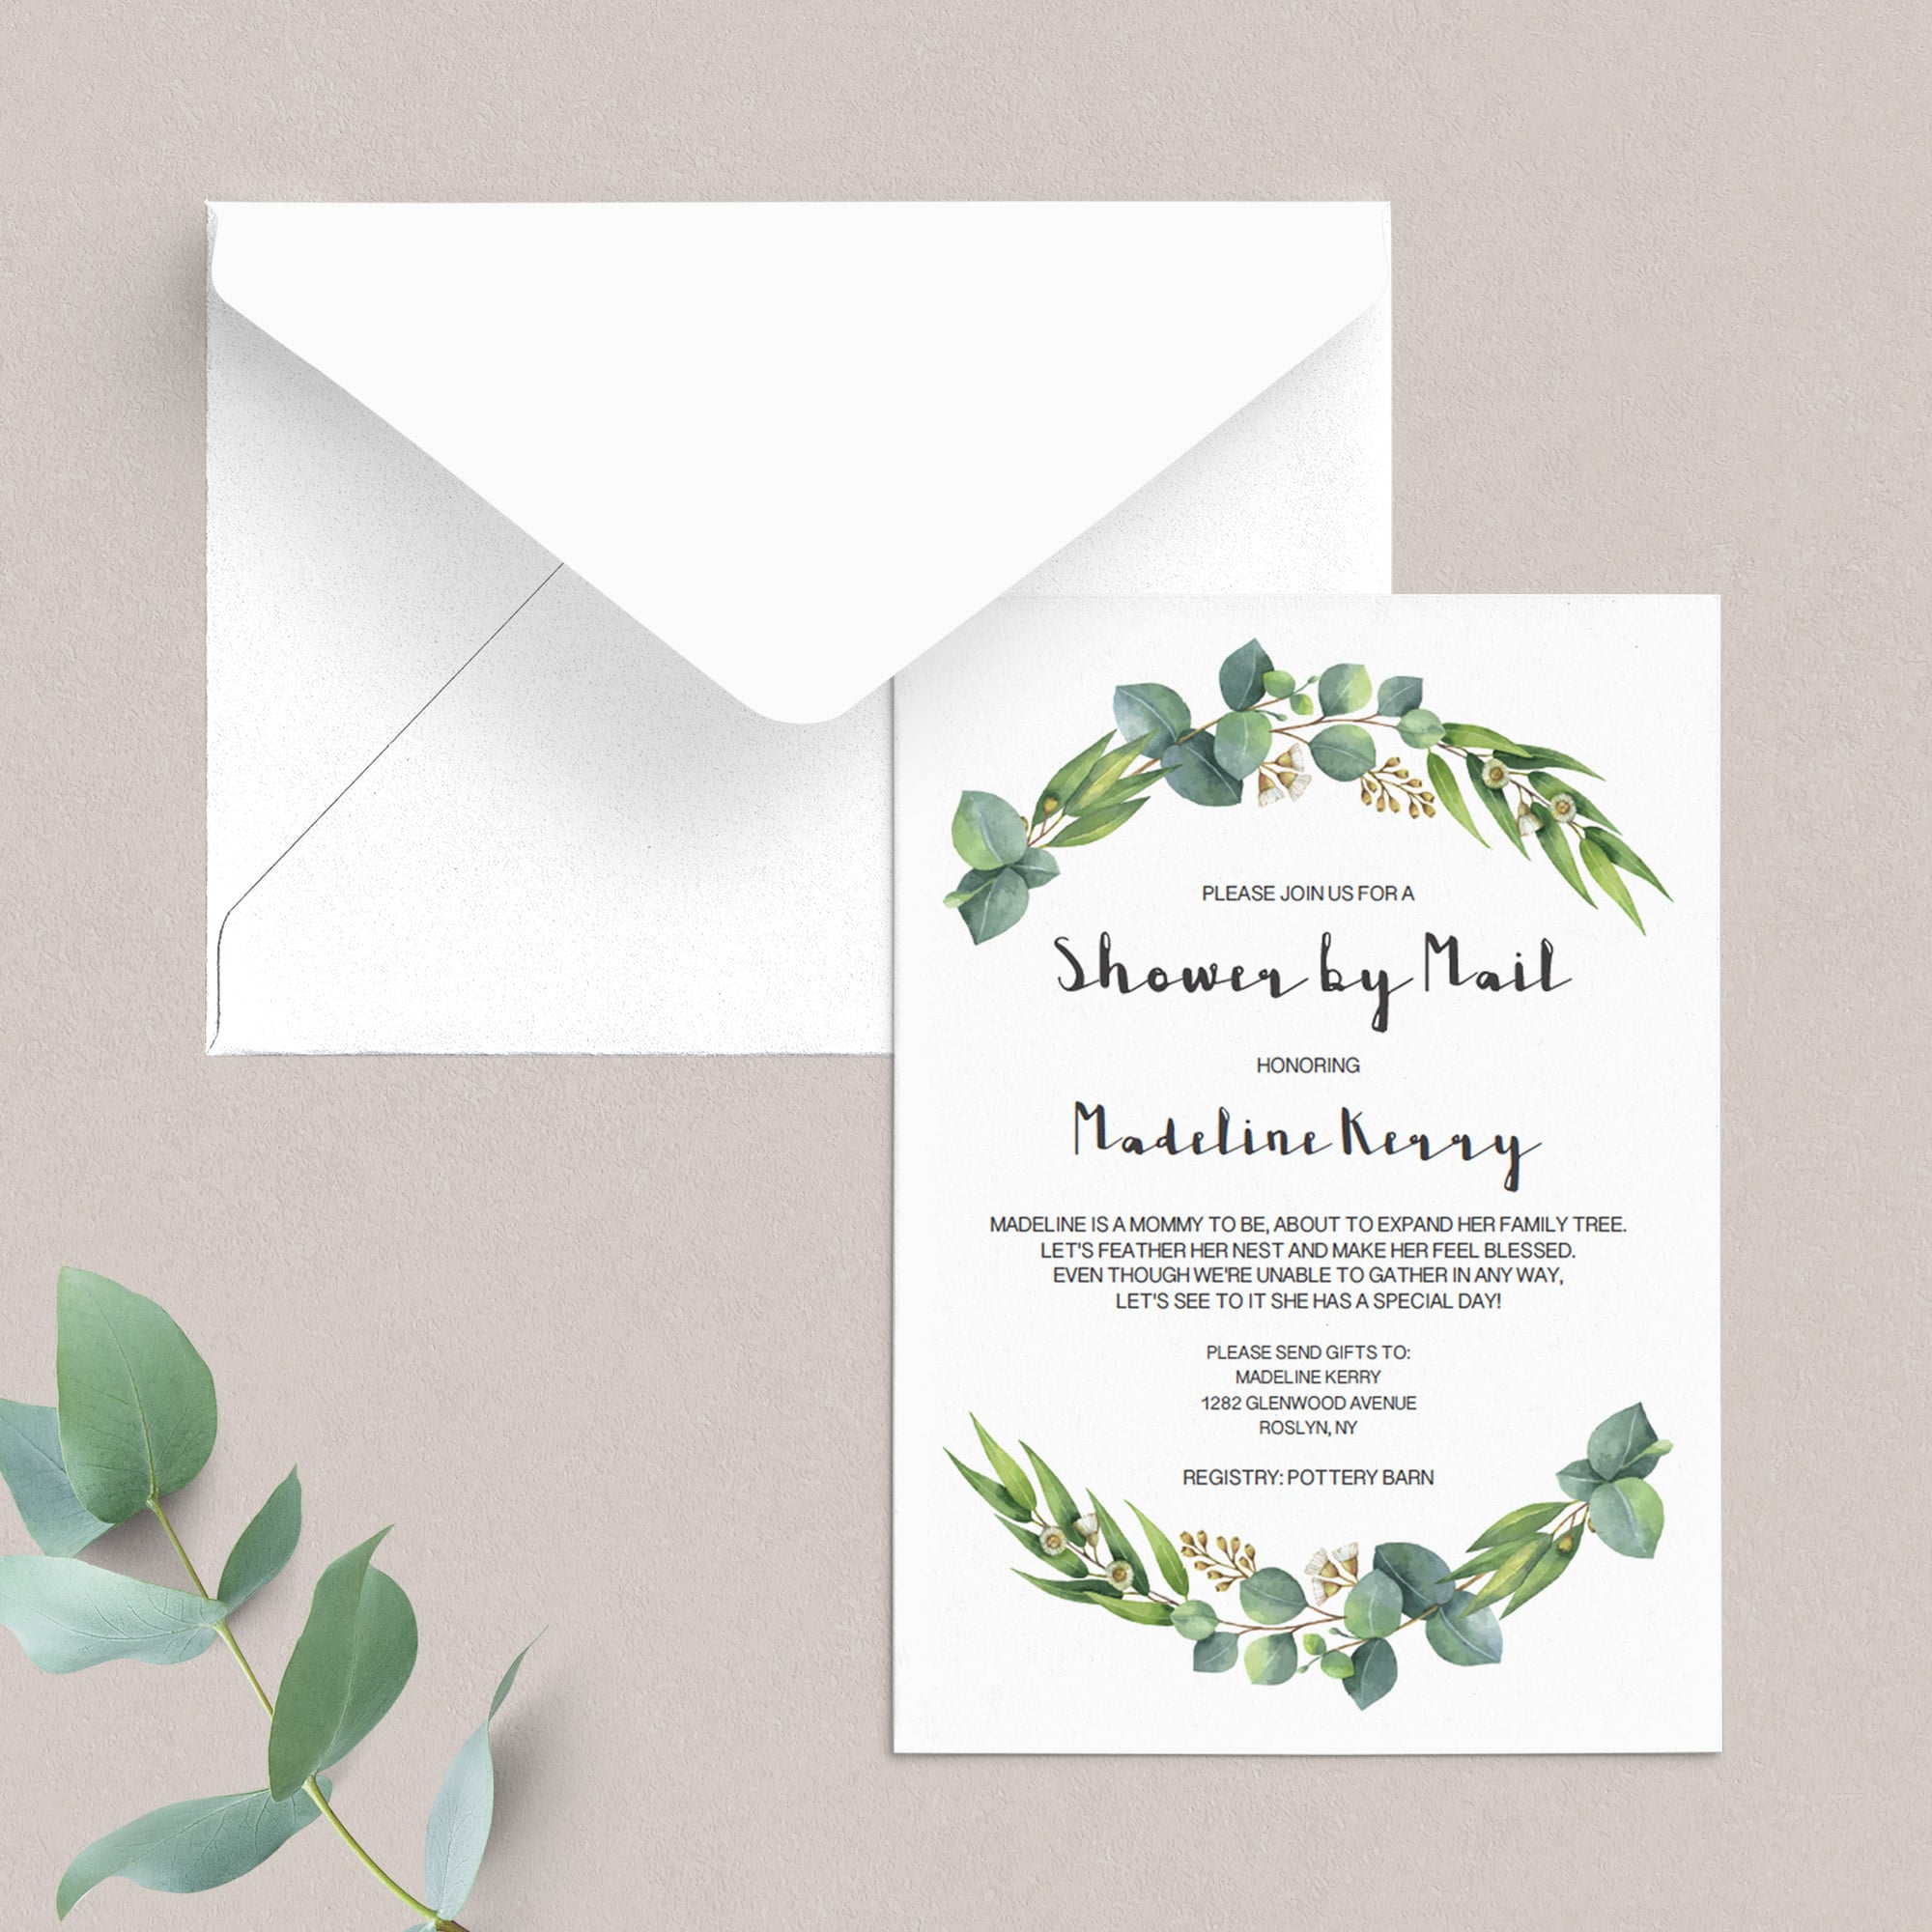 Greenery baby shower by mail invitation editable pdf template by LittleSizzle